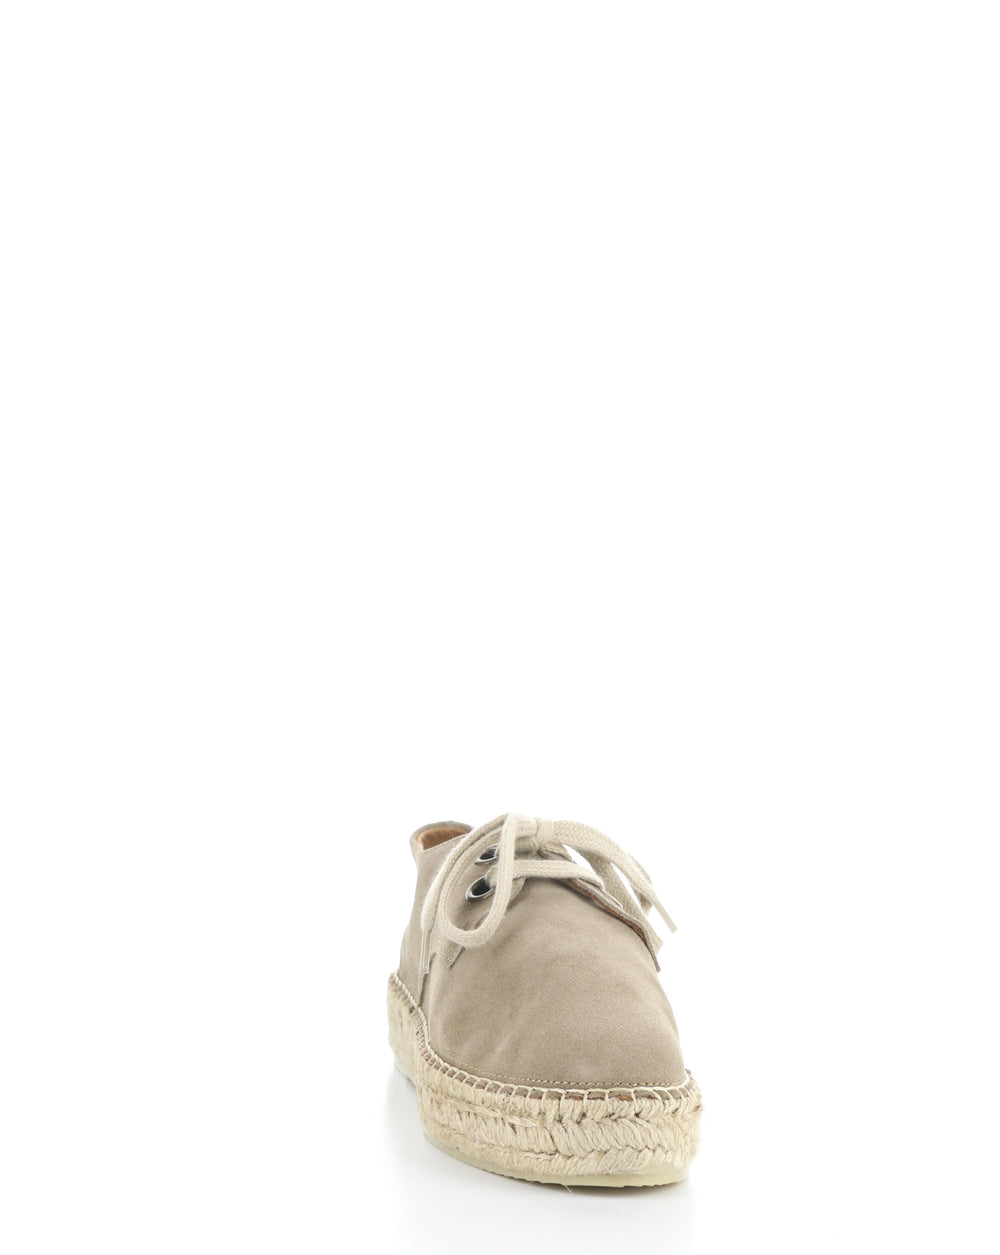 PETH525FLY 002 BEIGE Lace-up Shoes